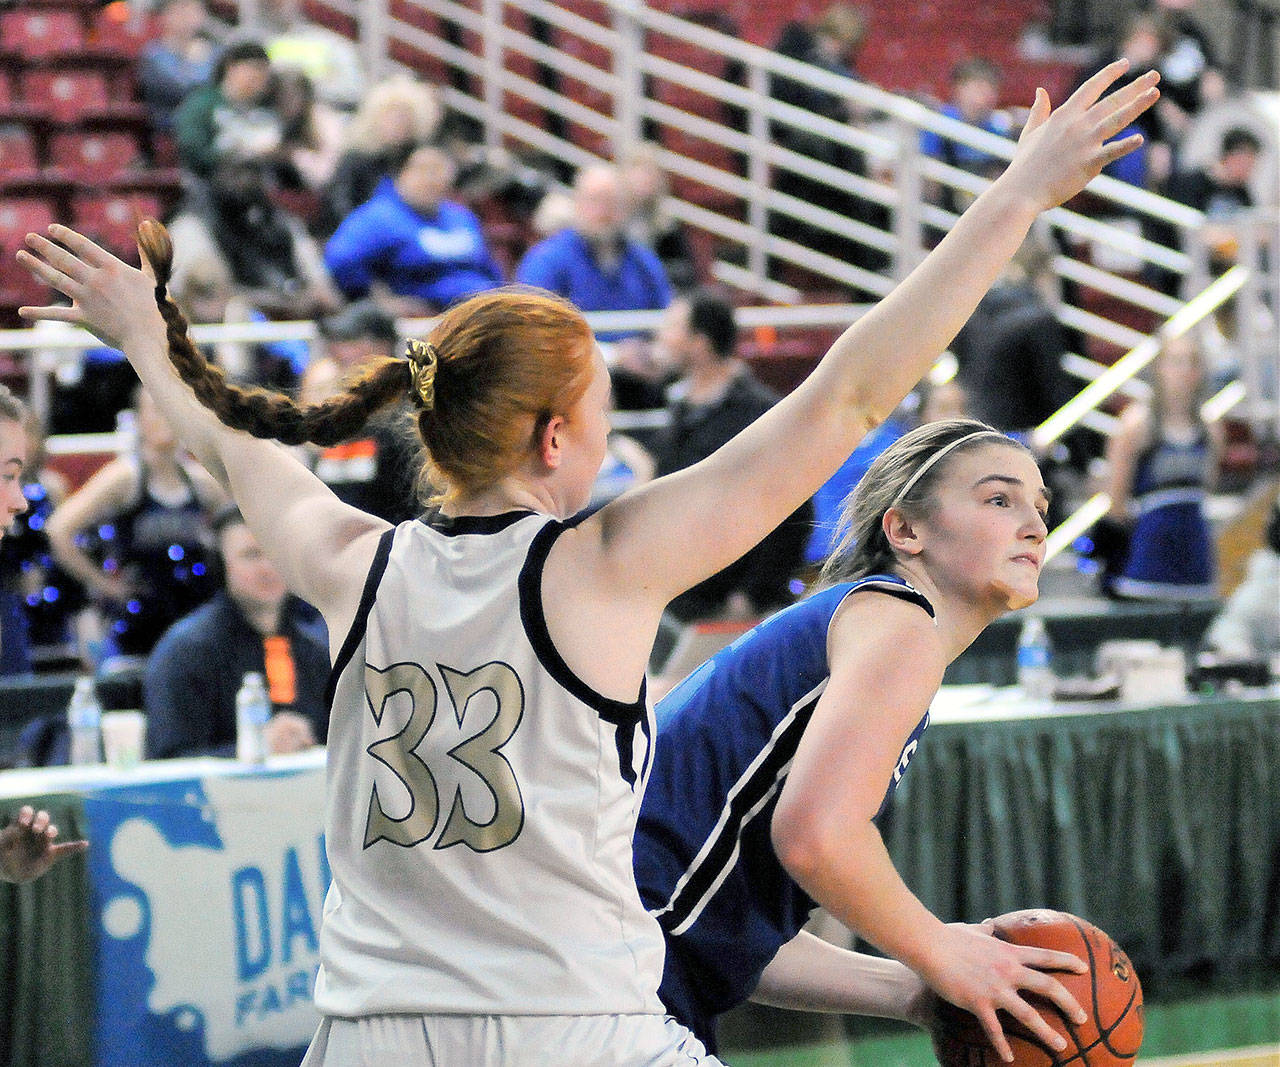 Elma’s Jalyn Sackrider looks to pass out of the post in the third quarter against Meridian on Friday. Sackrider finished the game with a team-leading 18 points in Elma’s 50-47 over the Trojans. (Hasani Grayson | Grays Harbor News Group)